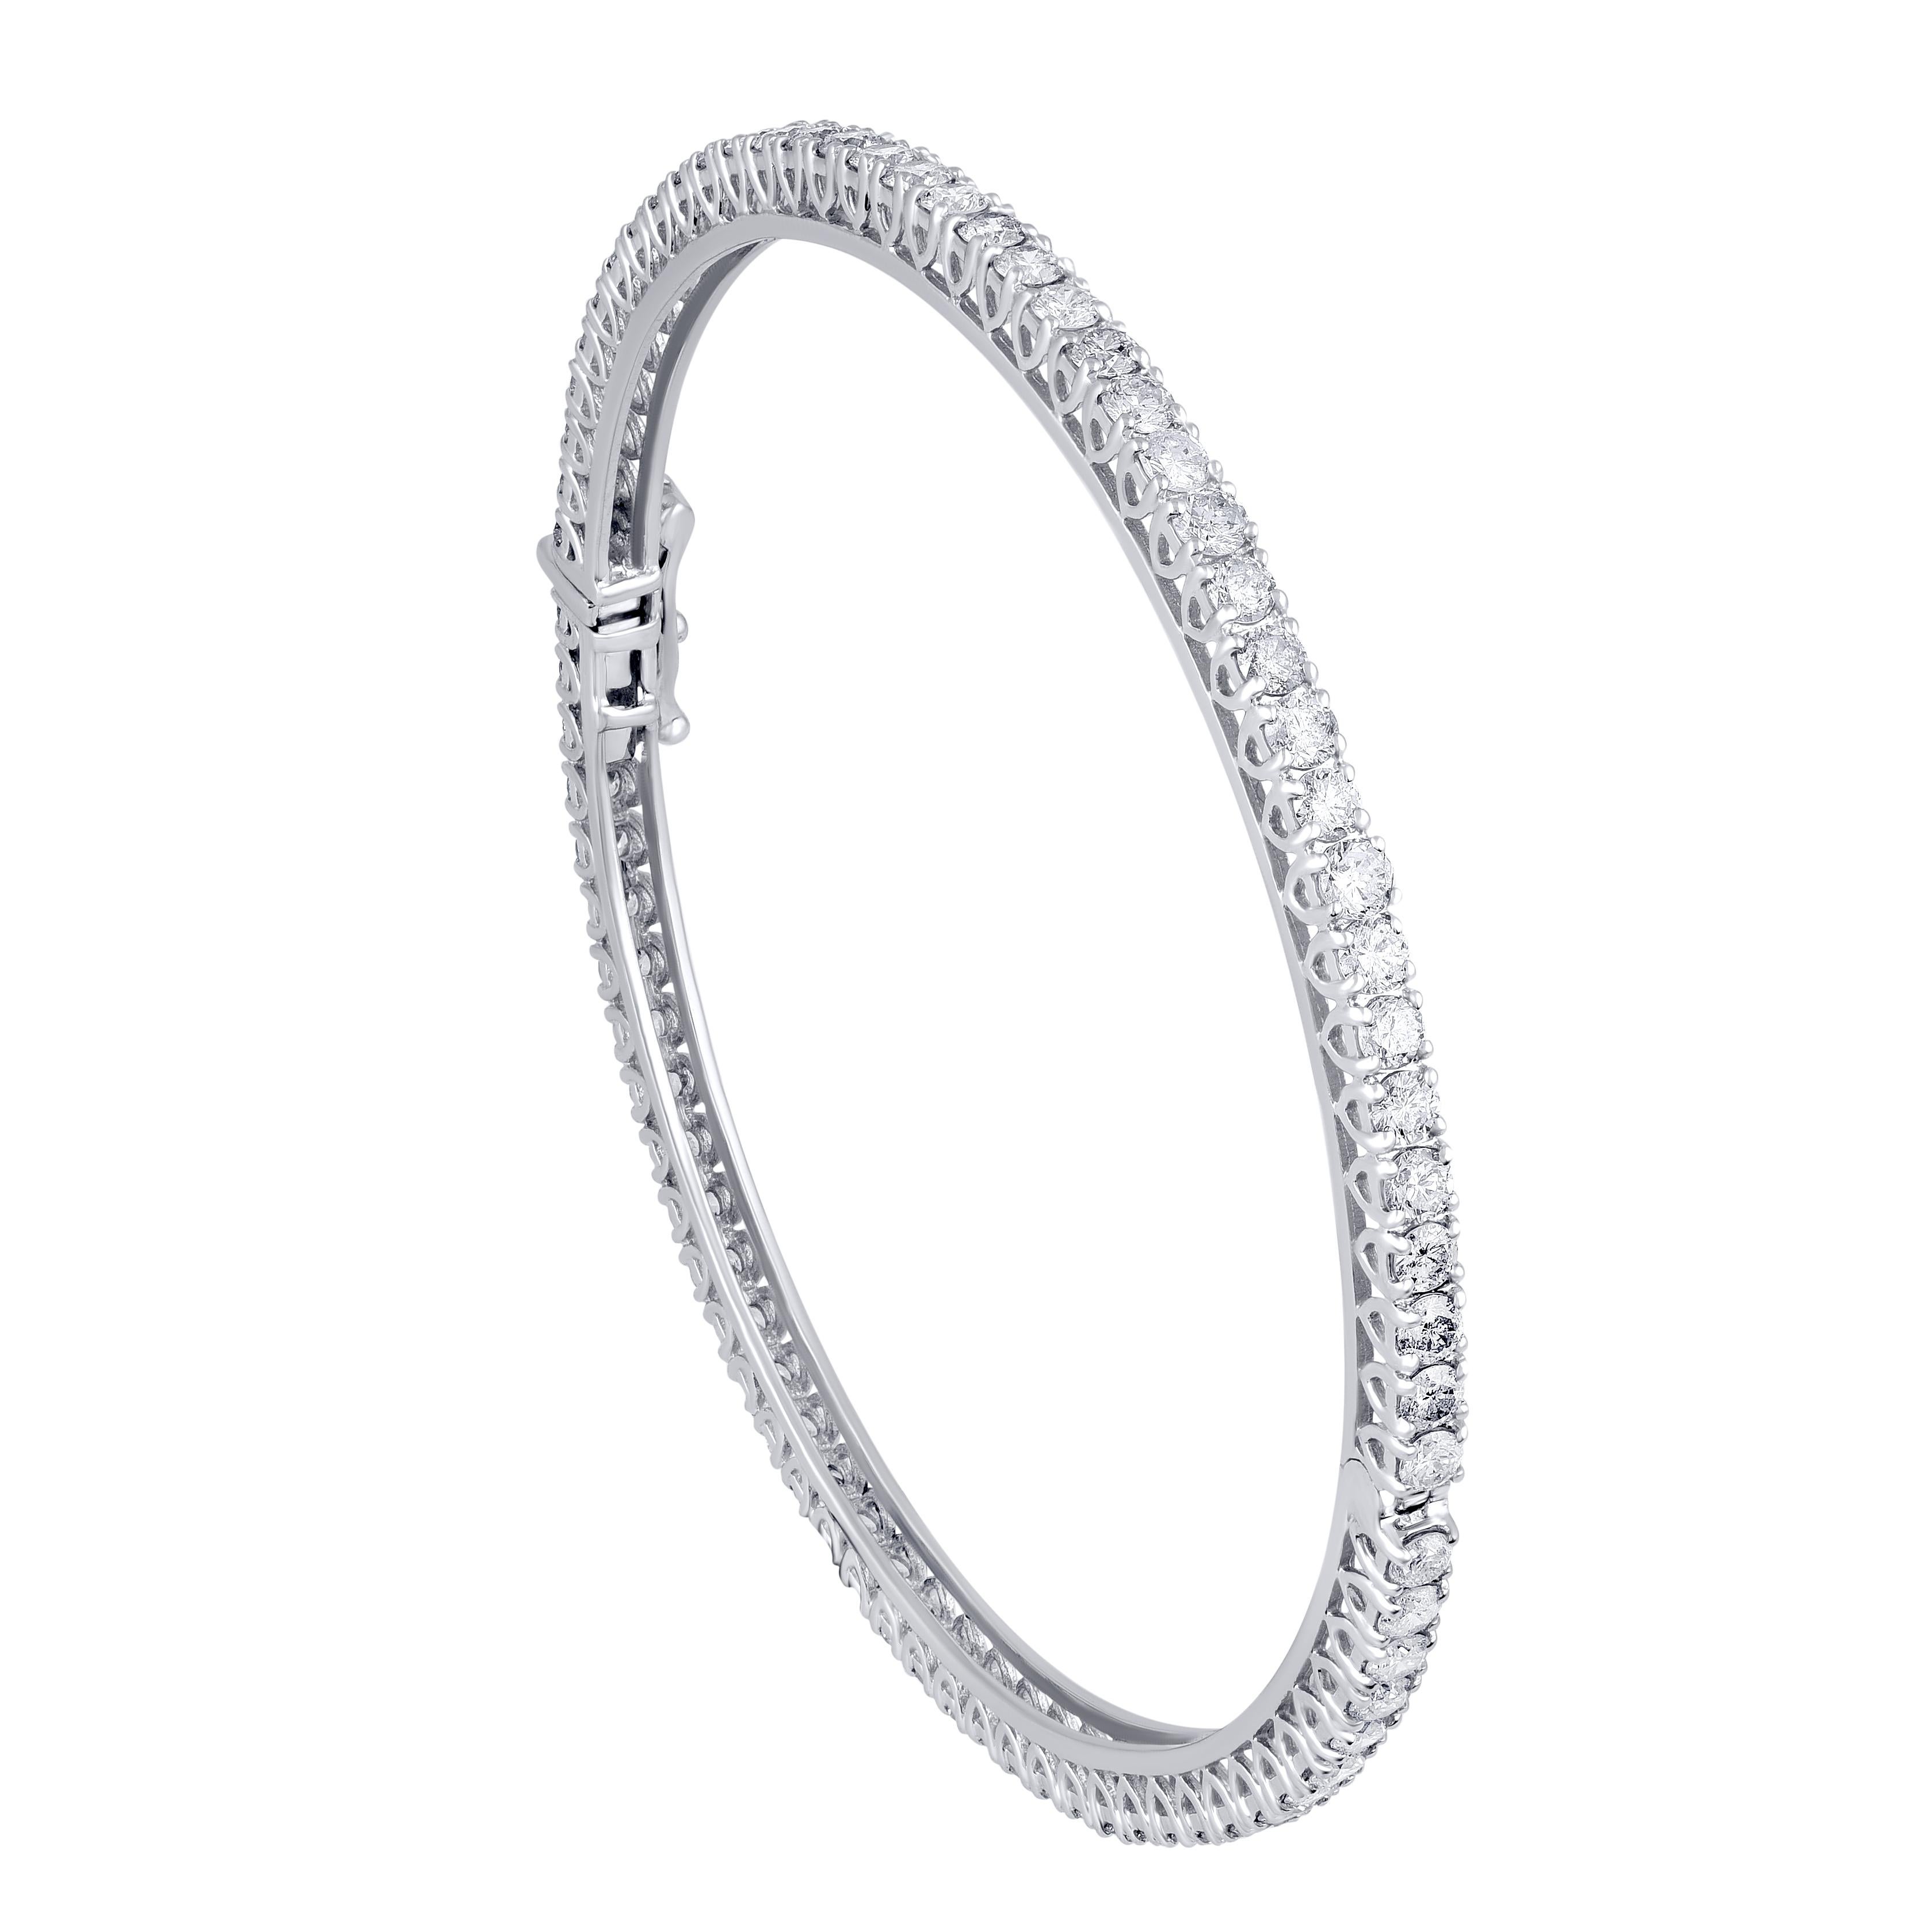 A shimmering piece of jewelry, this classic bangle is studded with 76 diamonds in prong setting and is crafted beautifully in 14 KT gold. Diamond details H-I Color, I2 Clarity. This piece comes along with inhouse authentication card. Will make a